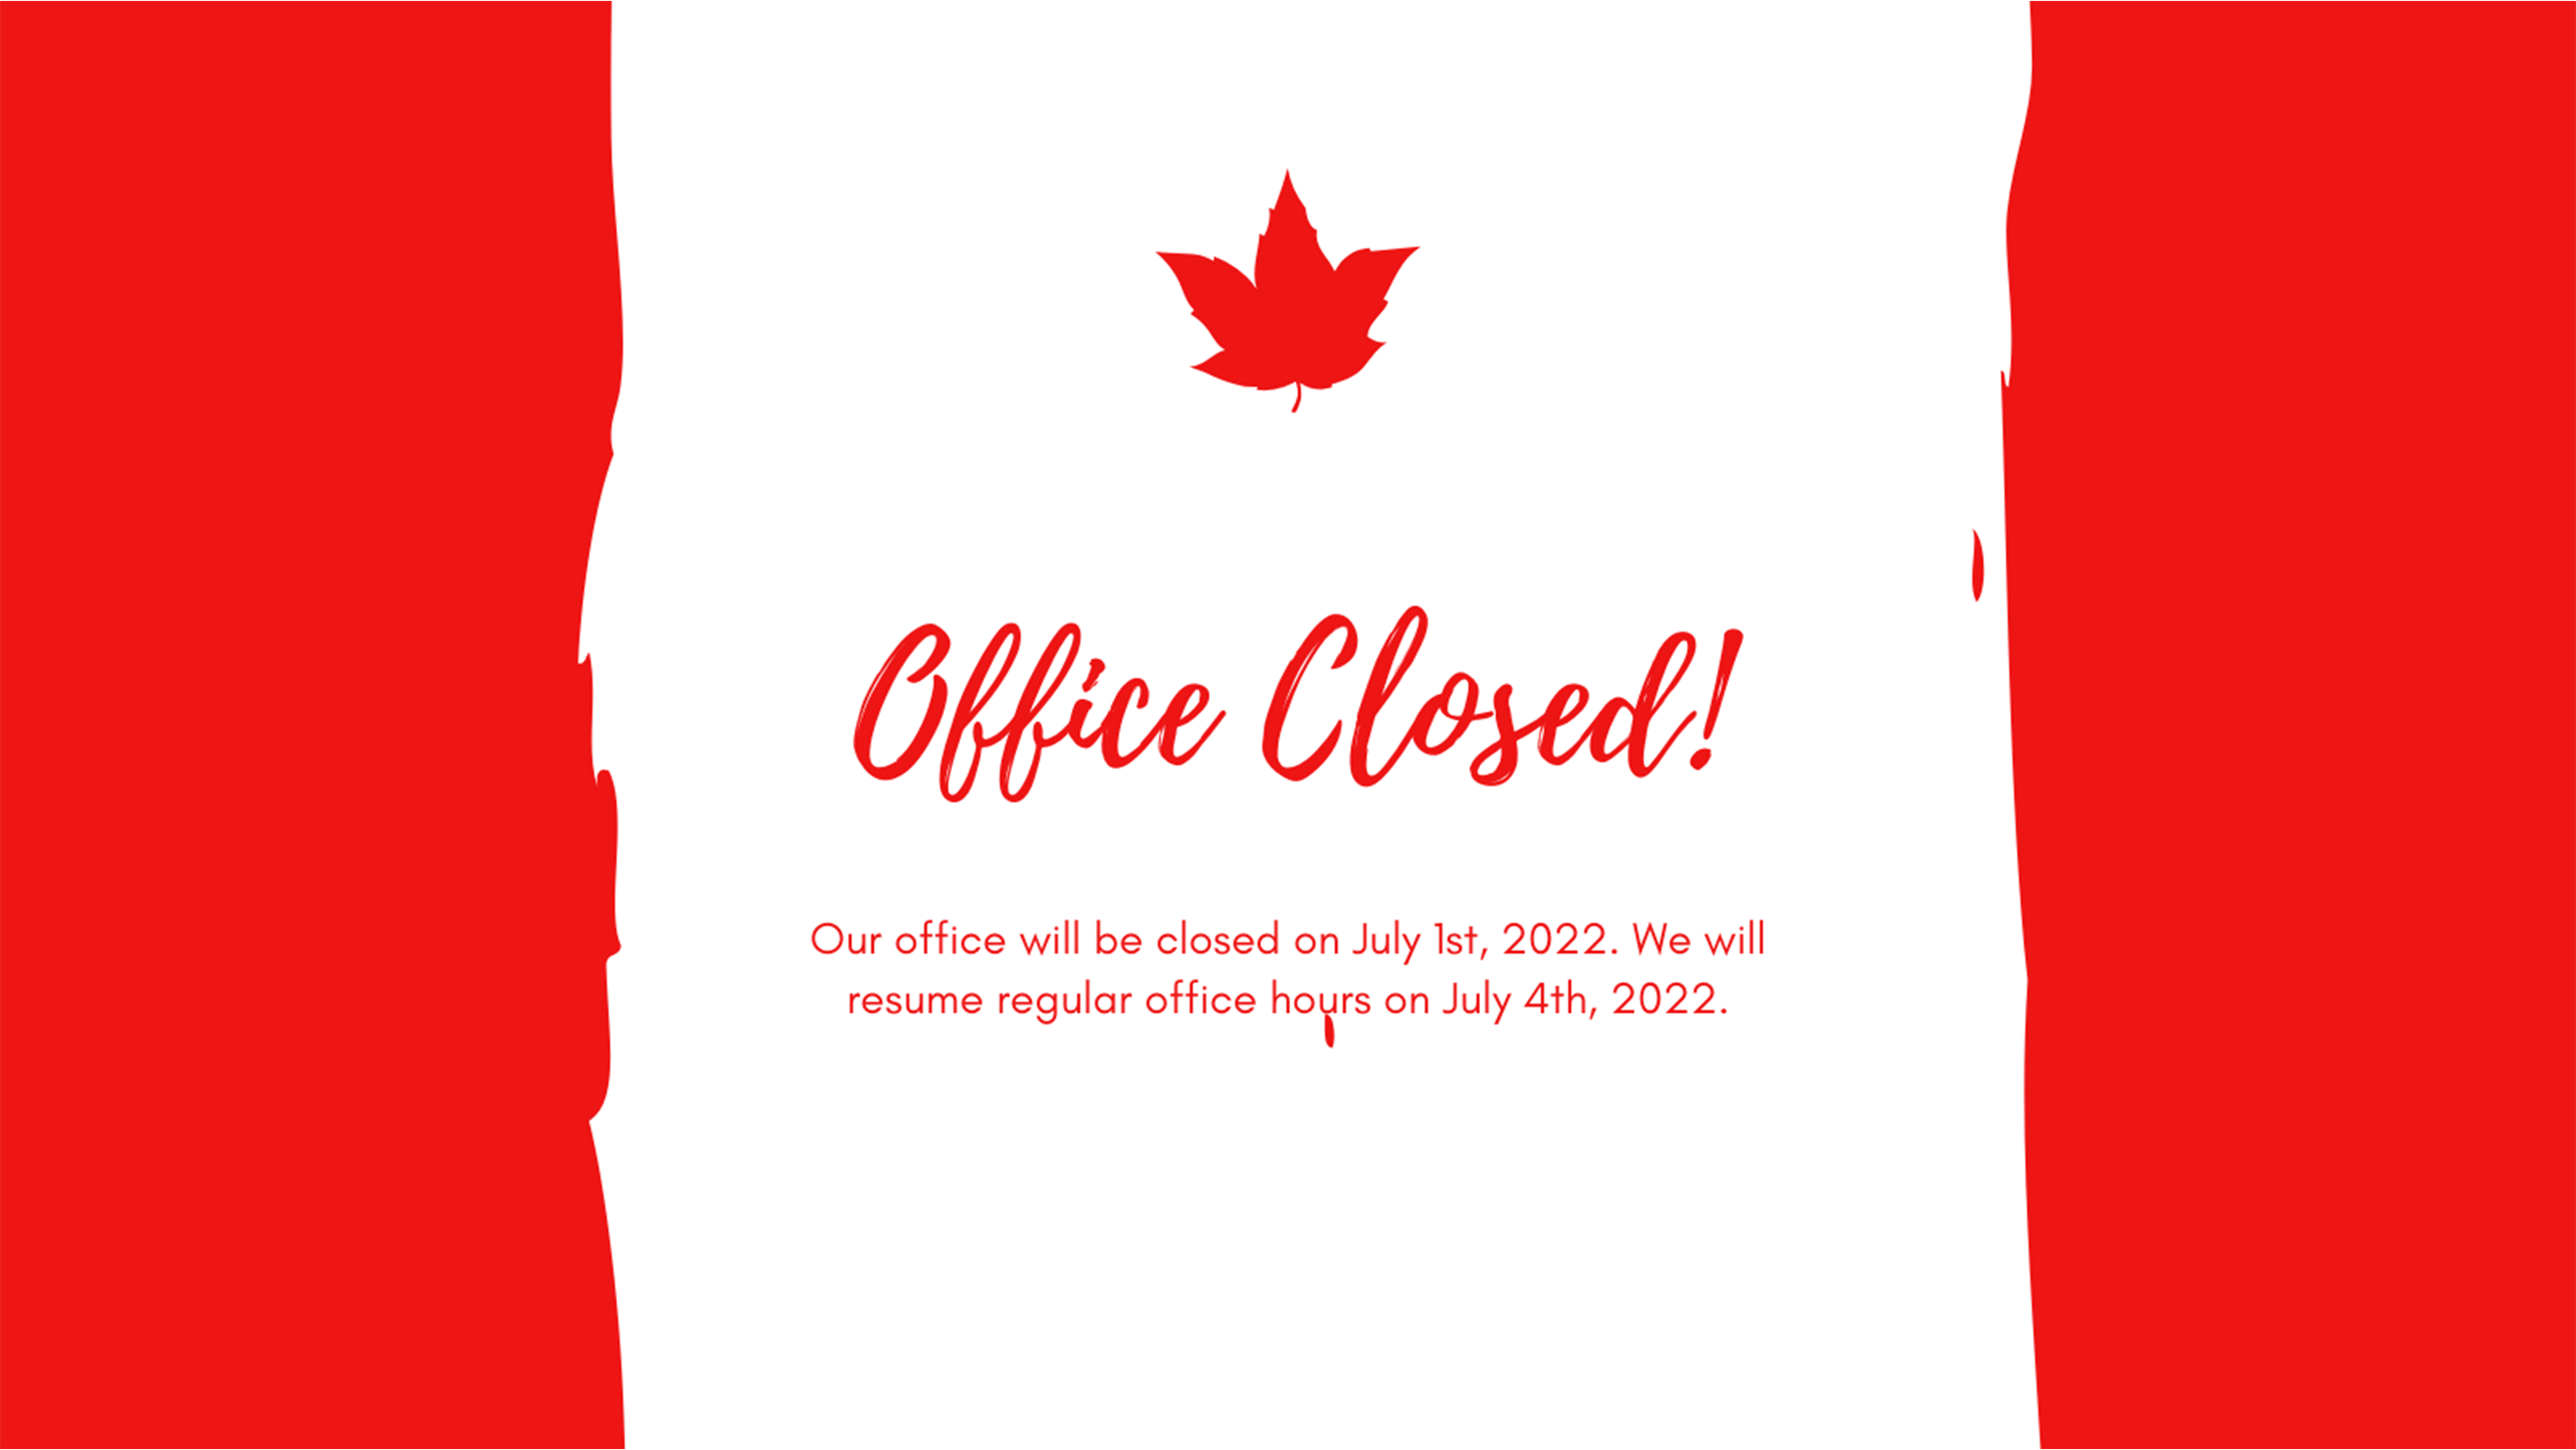 Office Closed - Canada Day